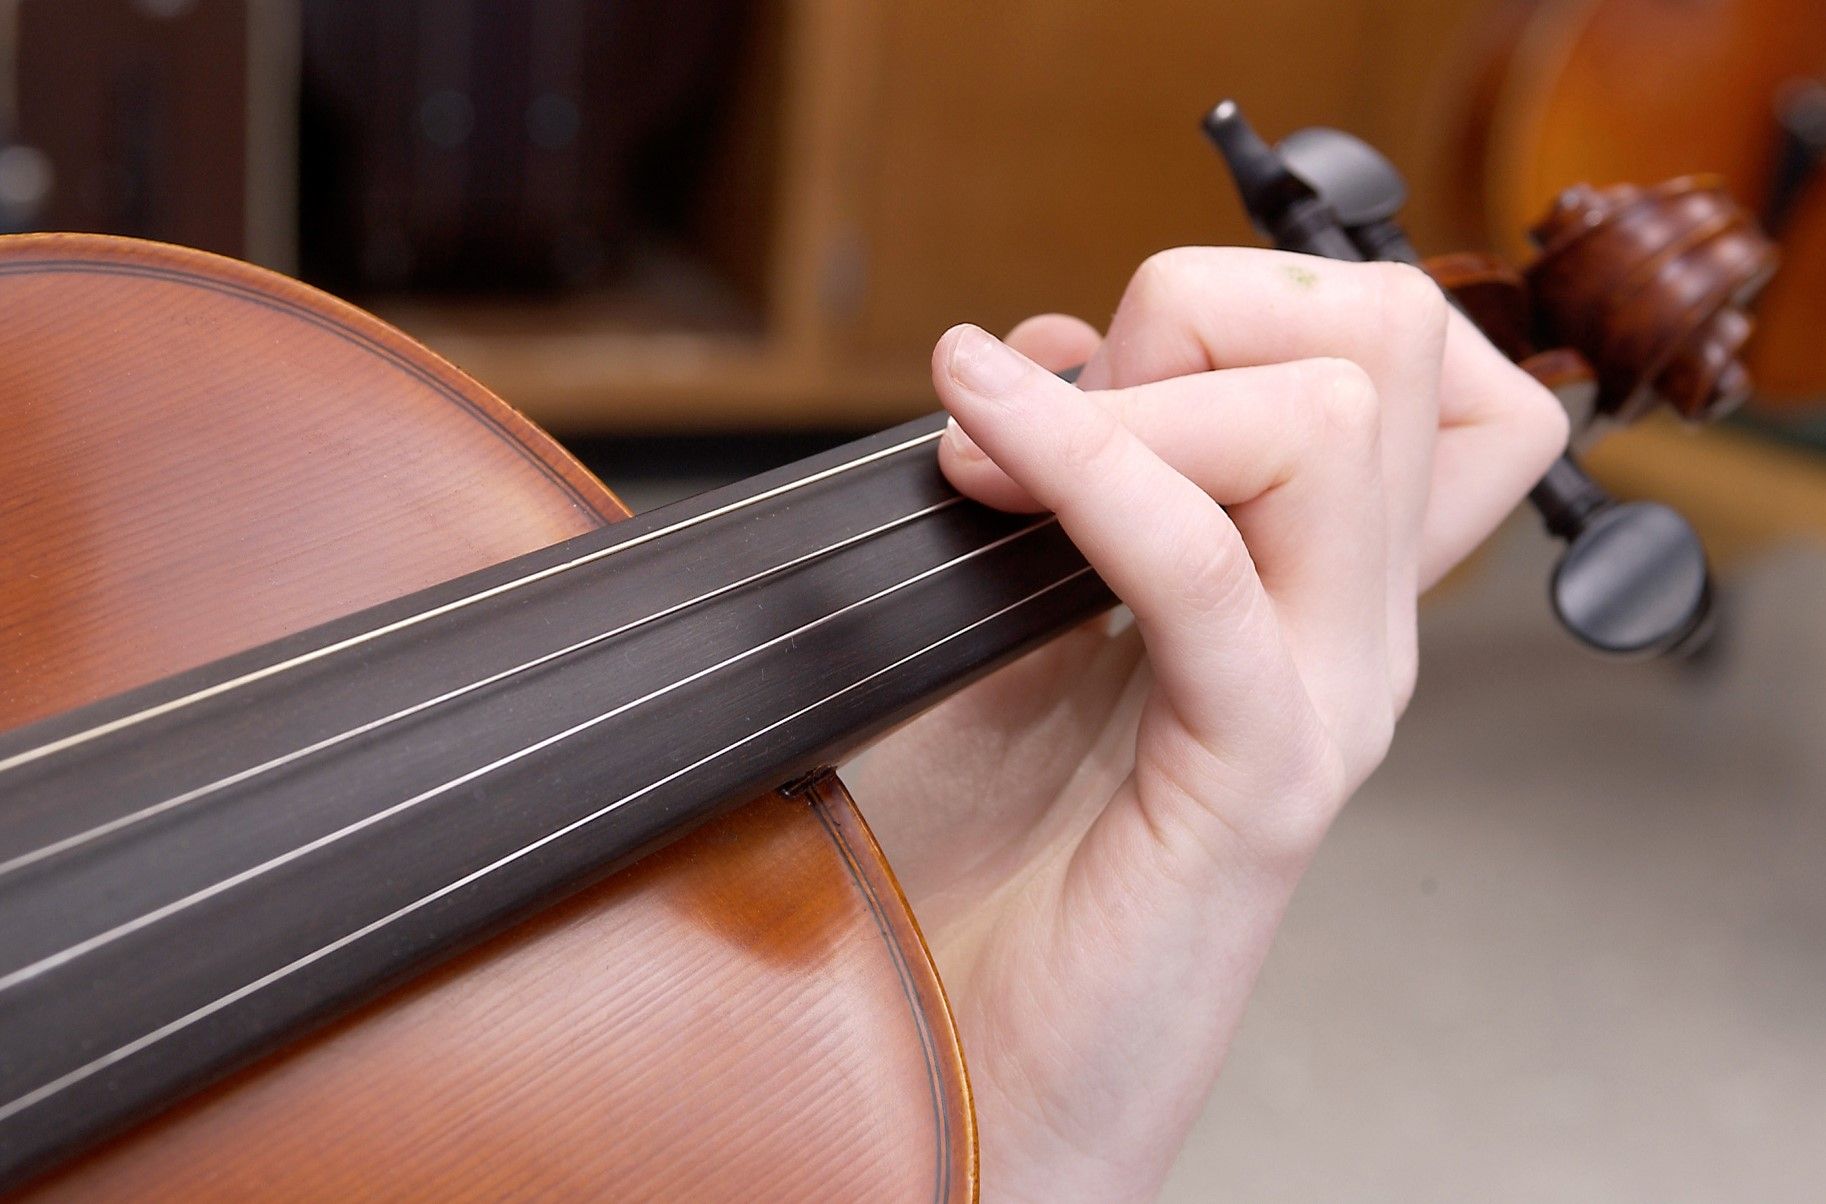 Closeup of someone's hands playing violin.